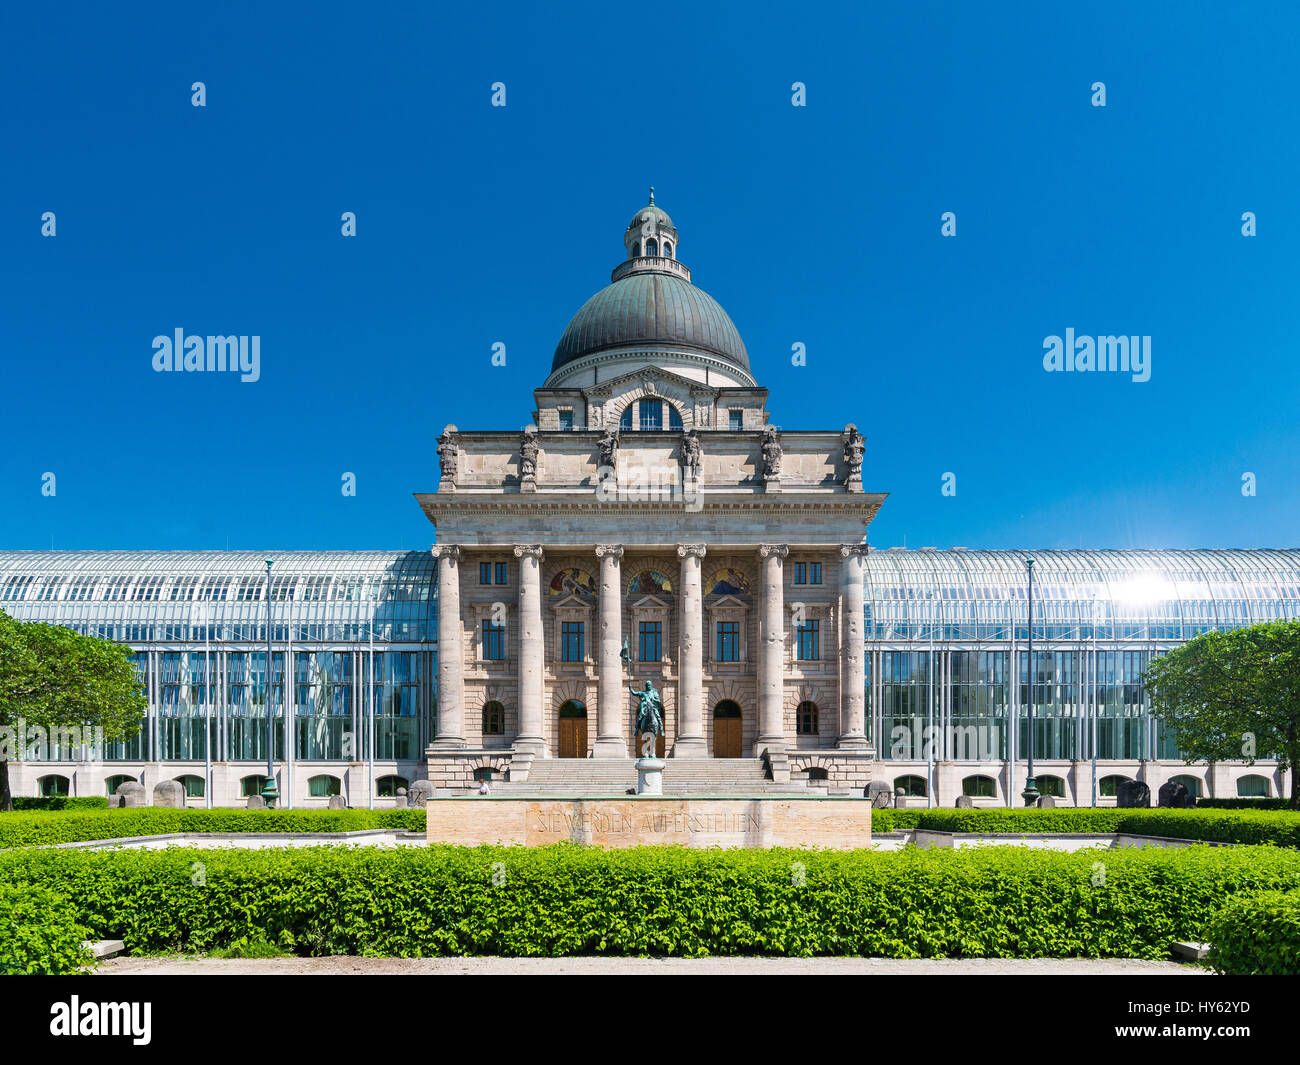 Munich, Germany - June 7, 2016: Bayerische Staatskanzlei - Bavarian State Chancellery is the name of a state agency of the German Free State of Bavari Stock Photo